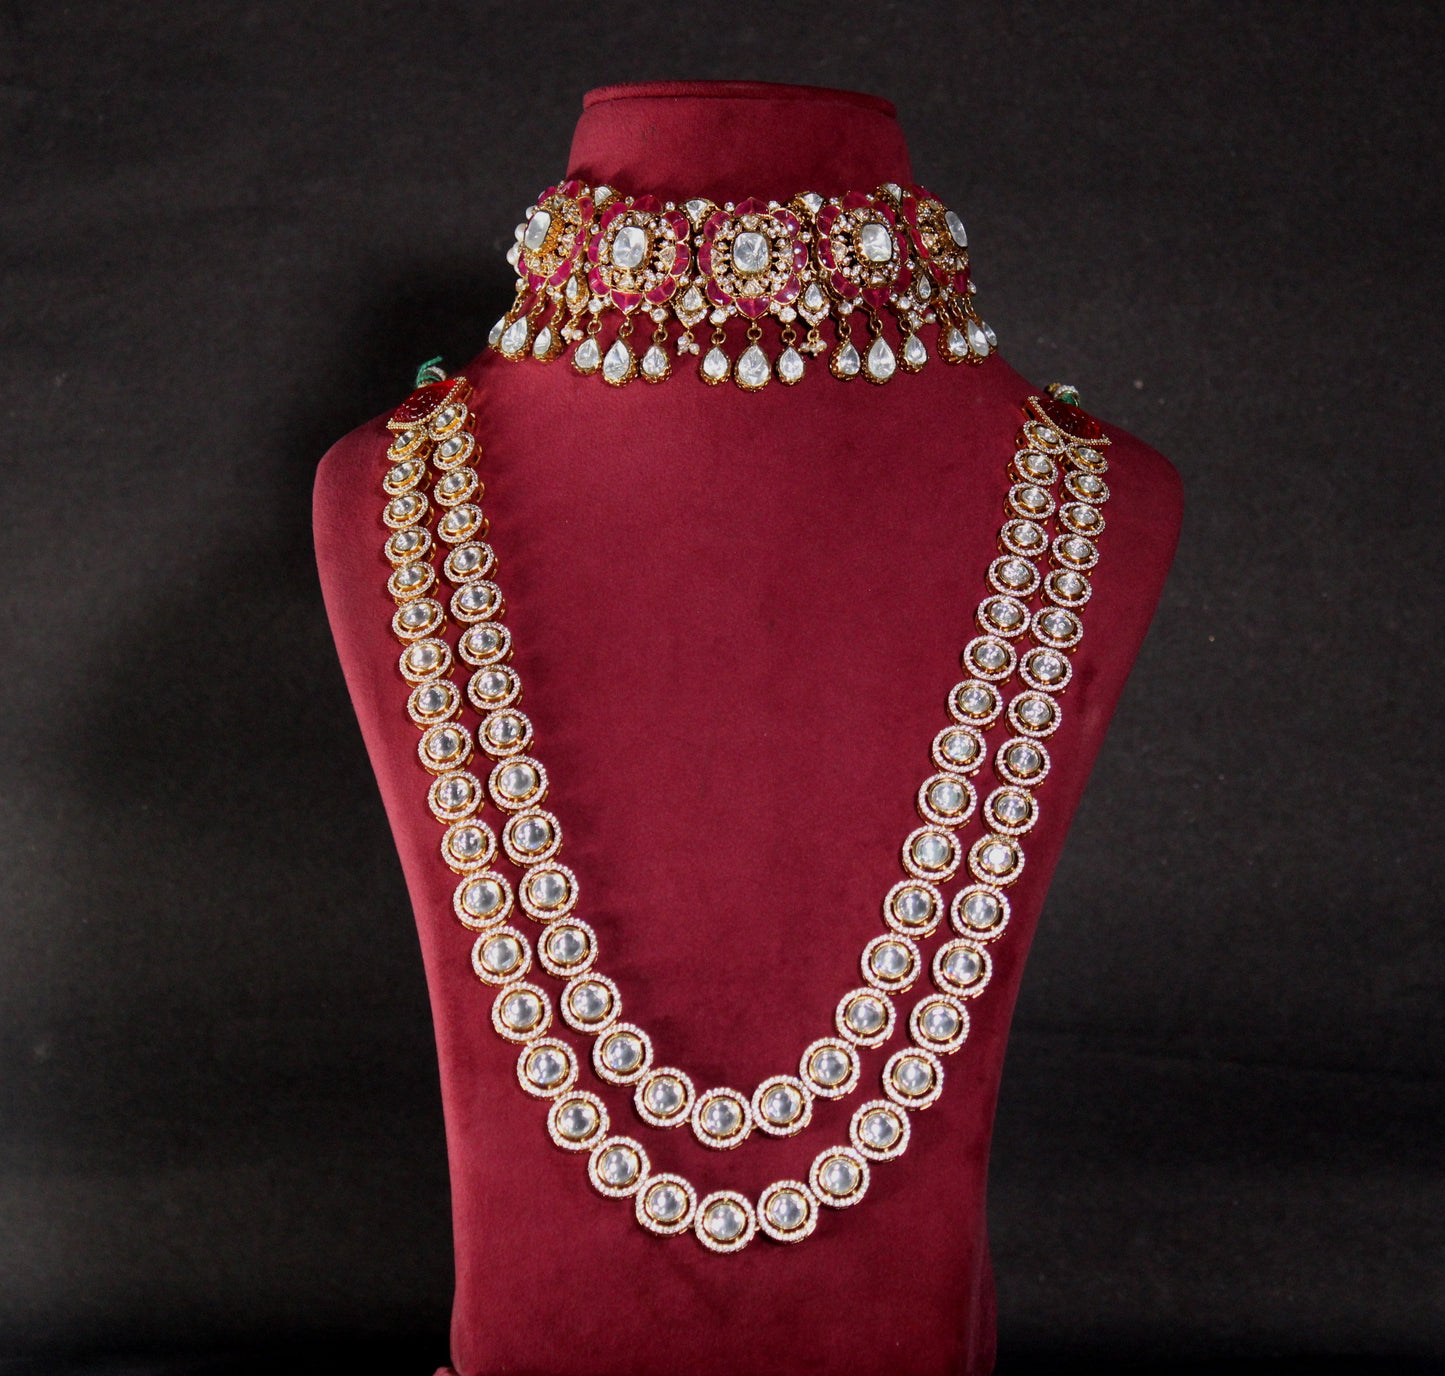 NECKLACE AND EARRING IN 92.5 STERLING SILVER IN 18KT GOLD PLATED WITH moissanite POLKI AND RUBY  Stoned WITH ZIRCONIA